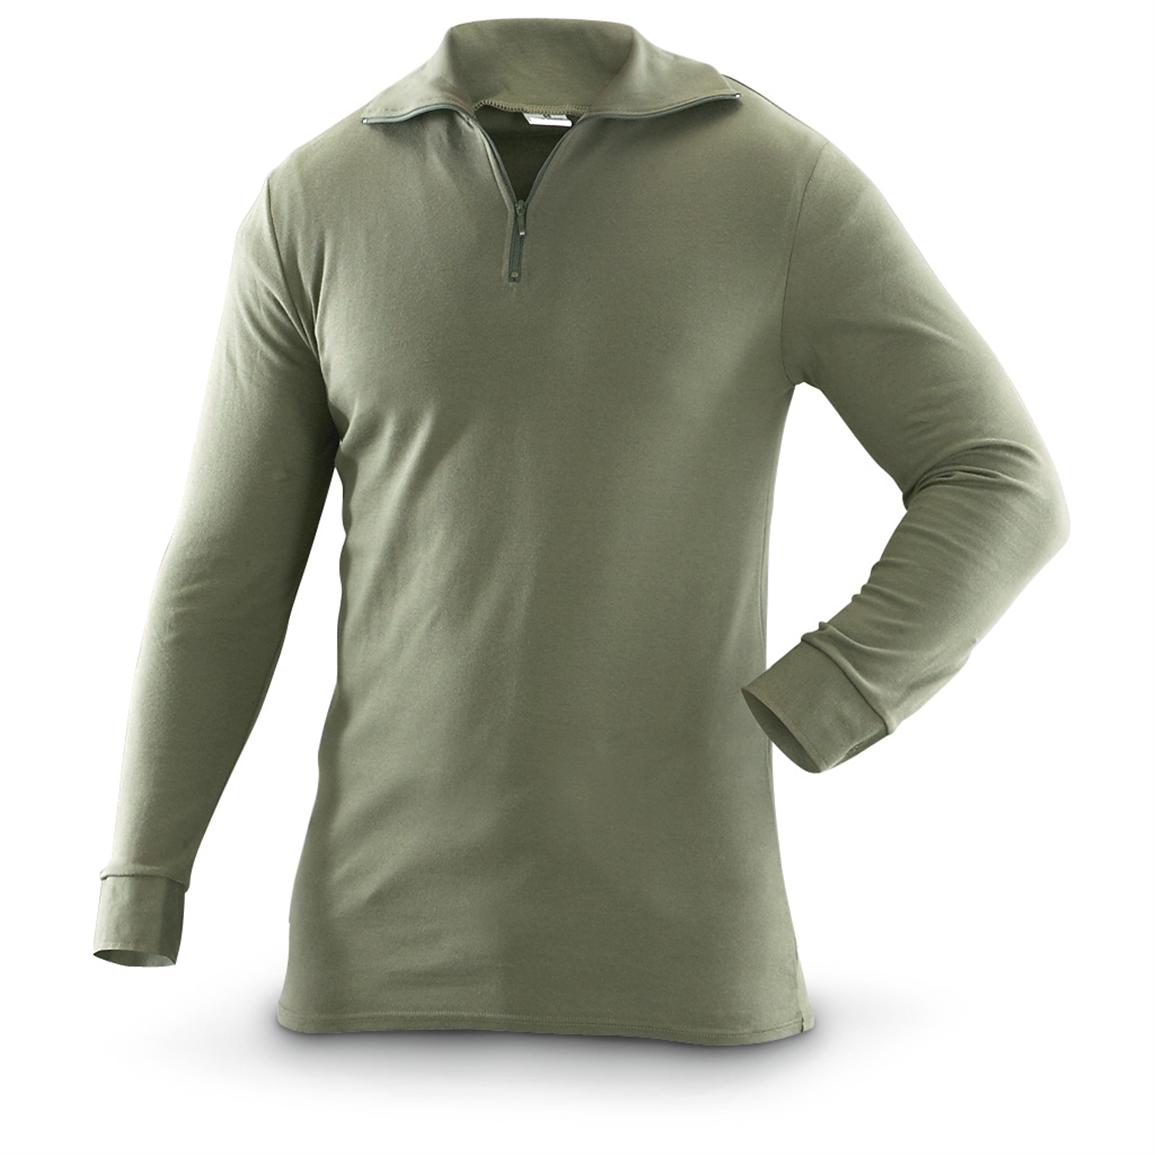 New French Military Surplus 1/4-zip Tricot Shirt, Olive Drab - 234684 ...